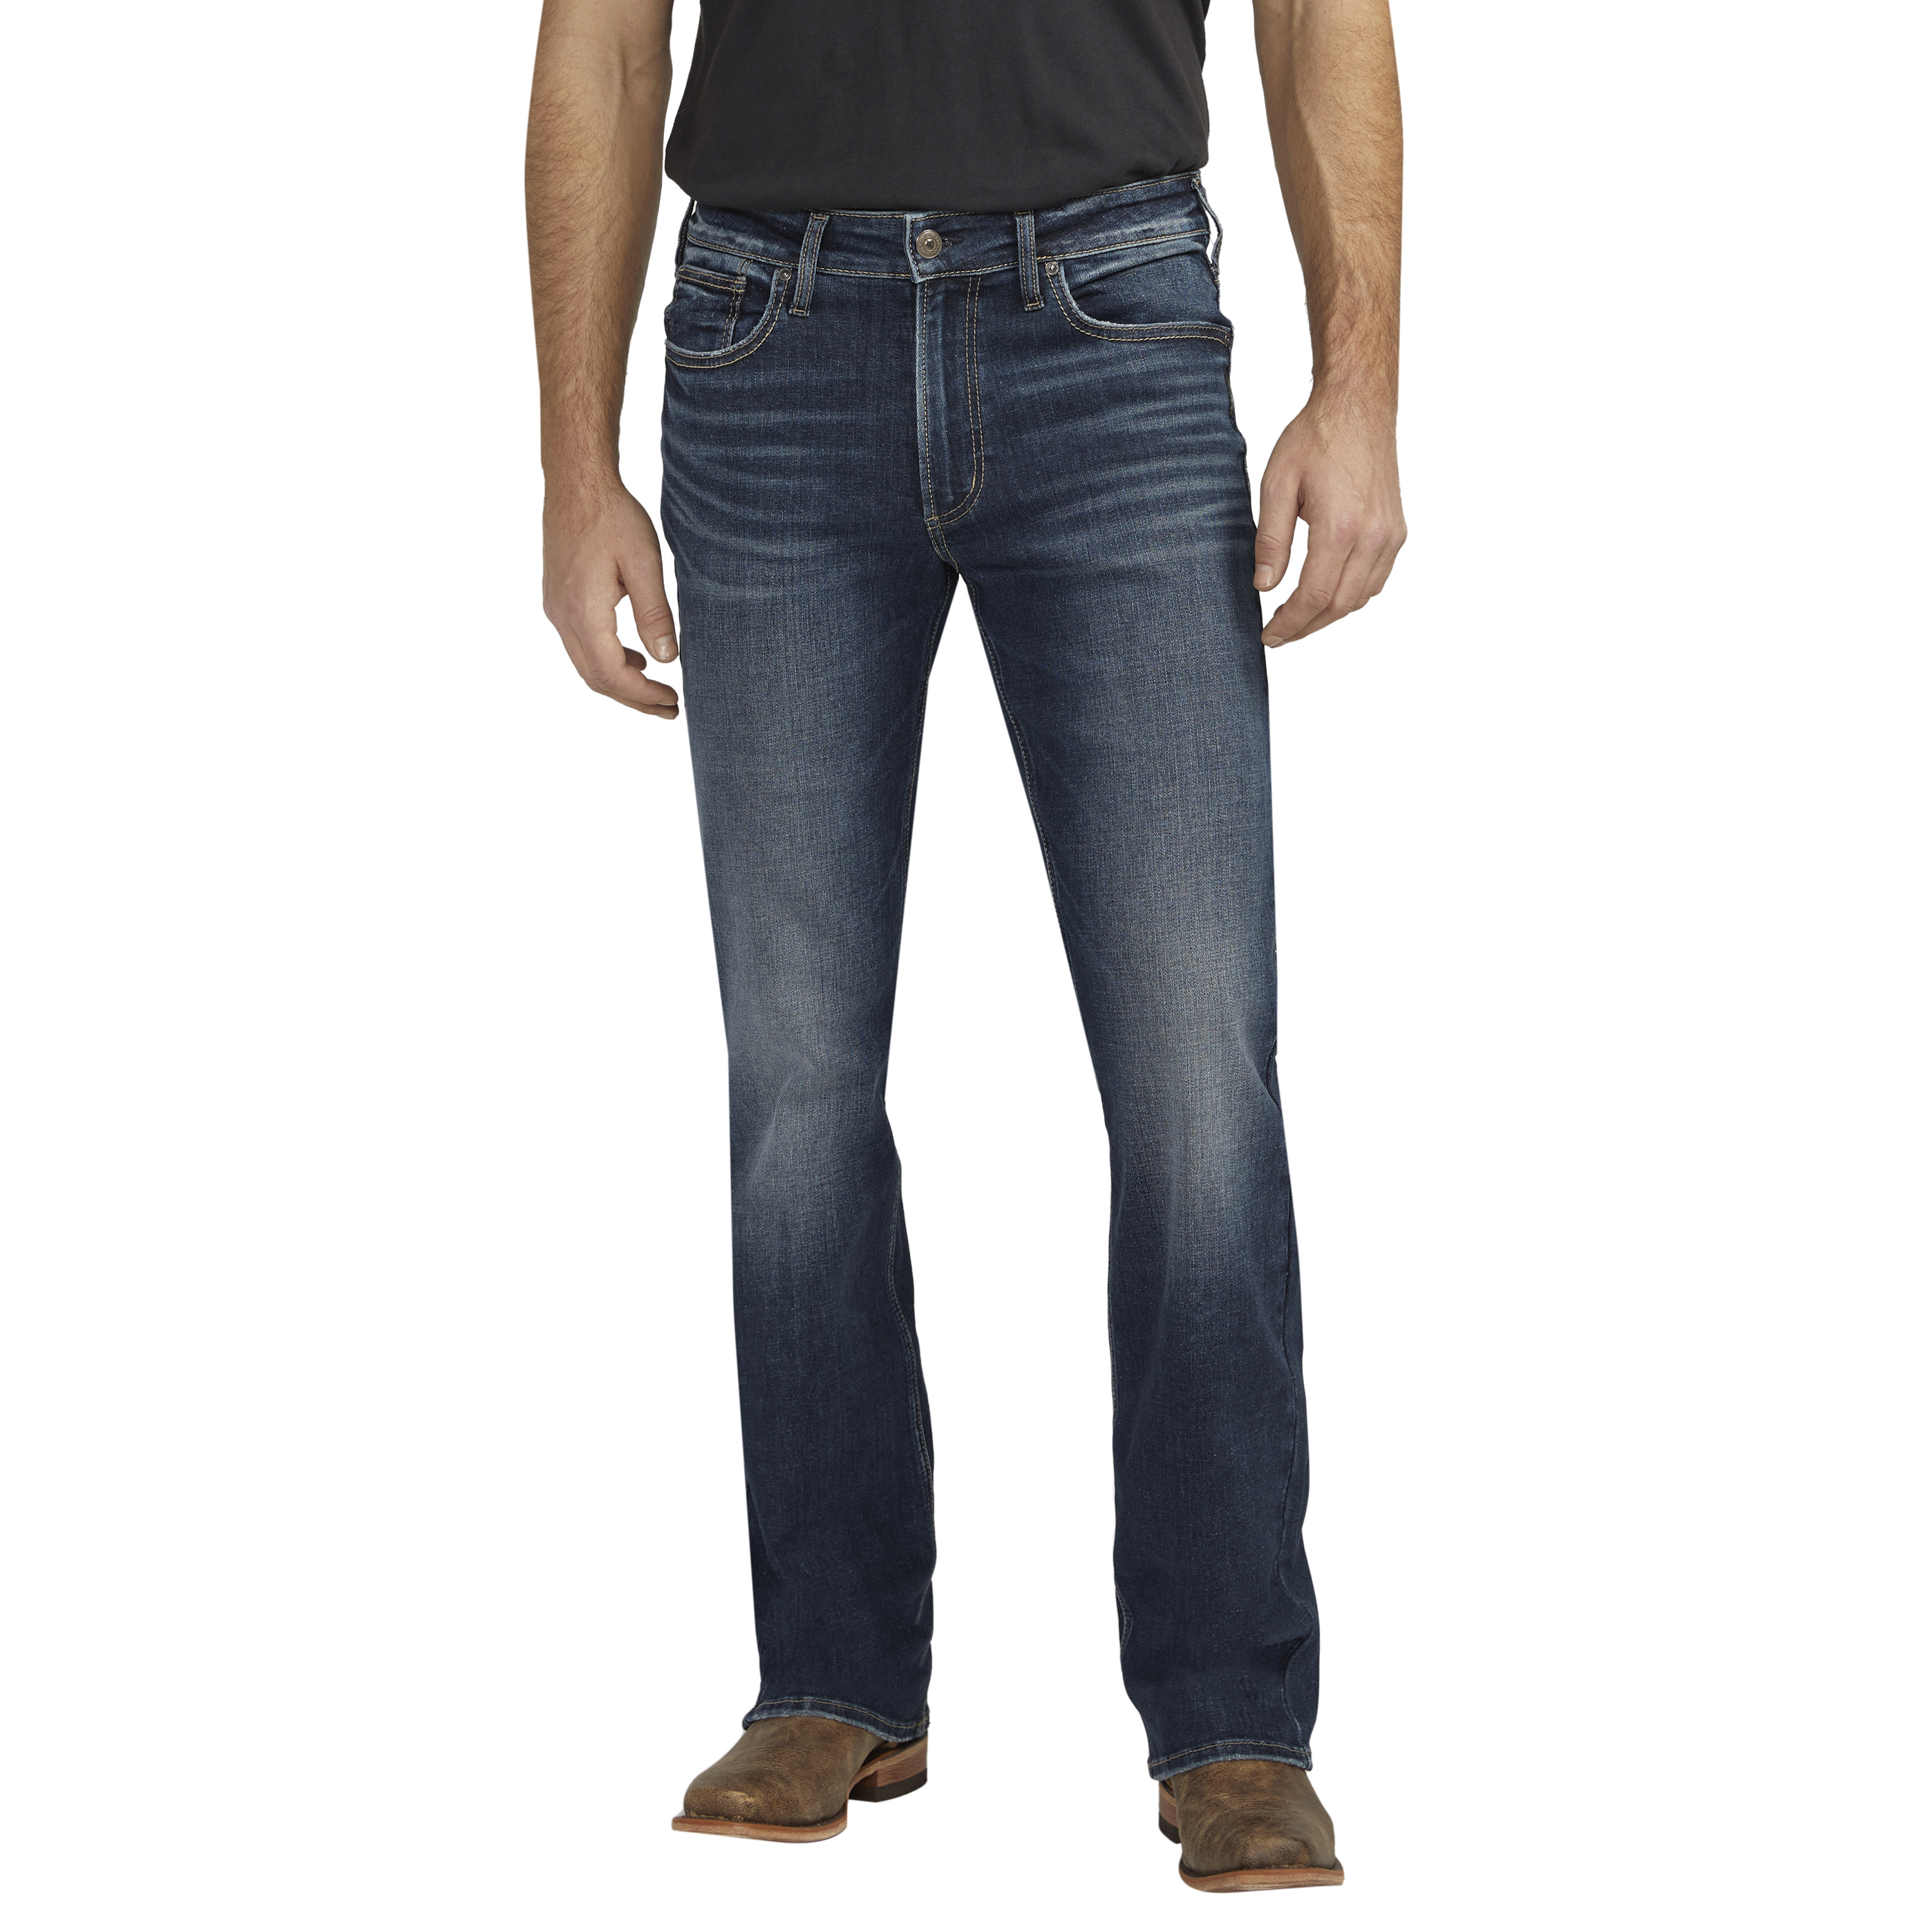 Silver Jeans Co. Men's Zac Relaxed Fit Straight Leg Jeans, EAE314 ...